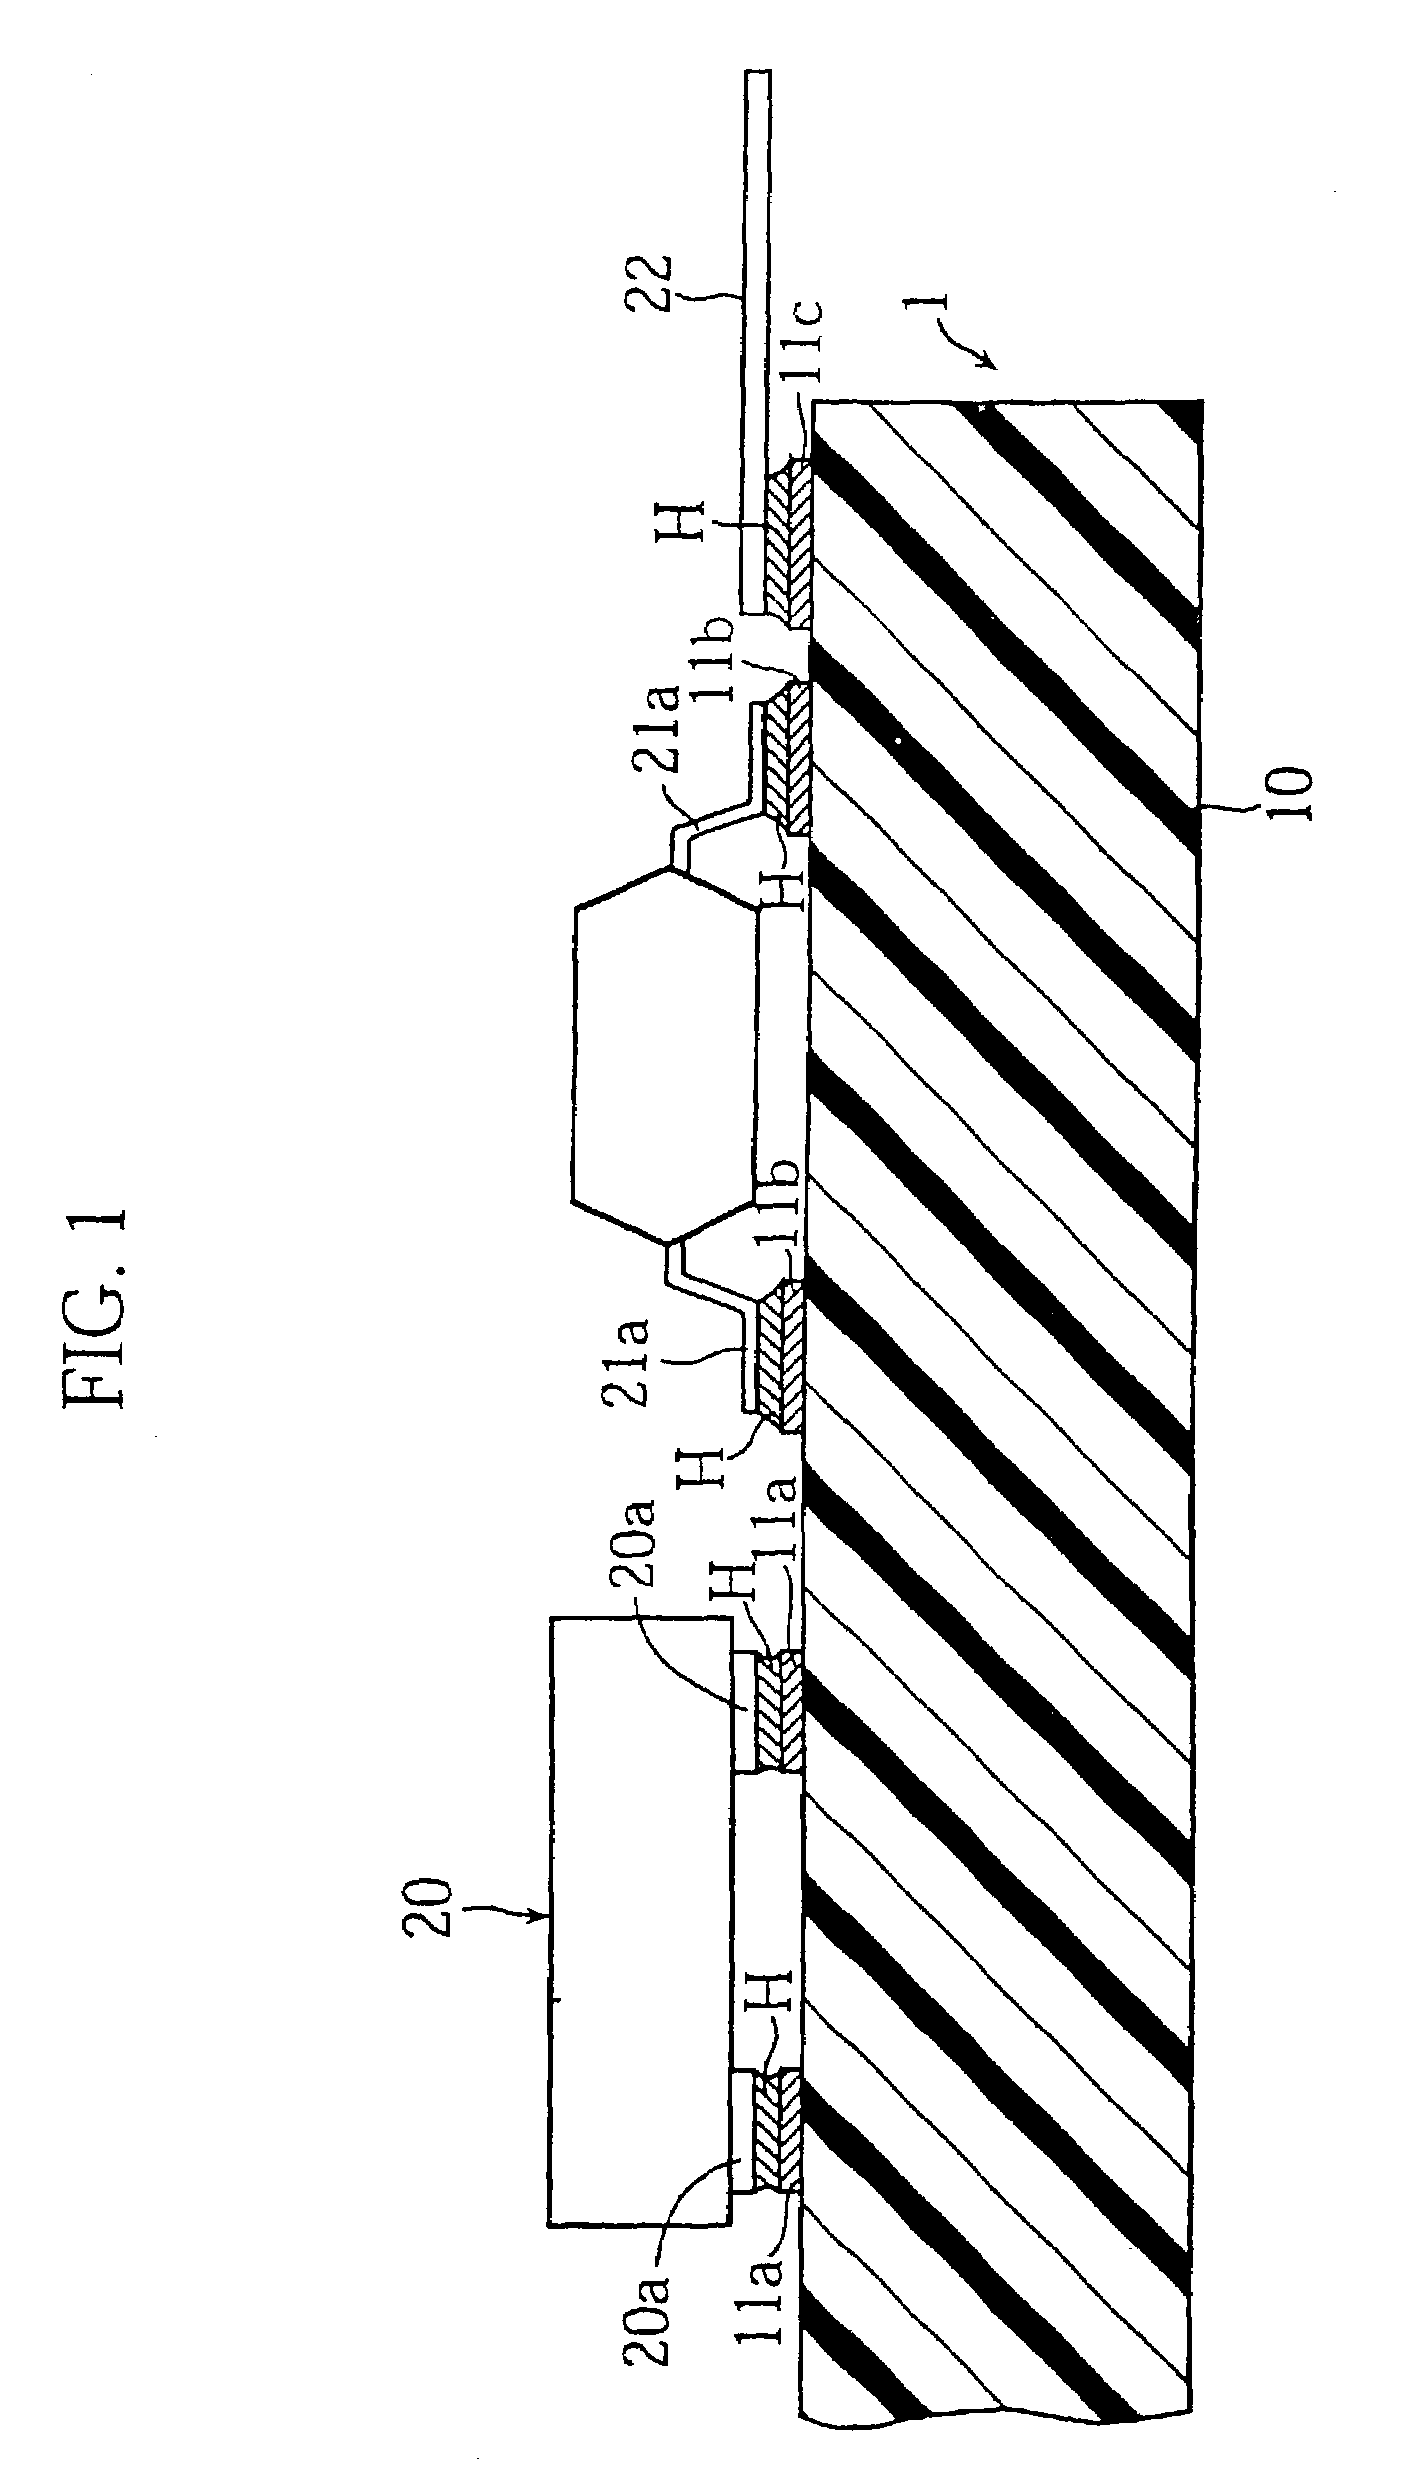 Structure for interconnecting conductors and connecting method